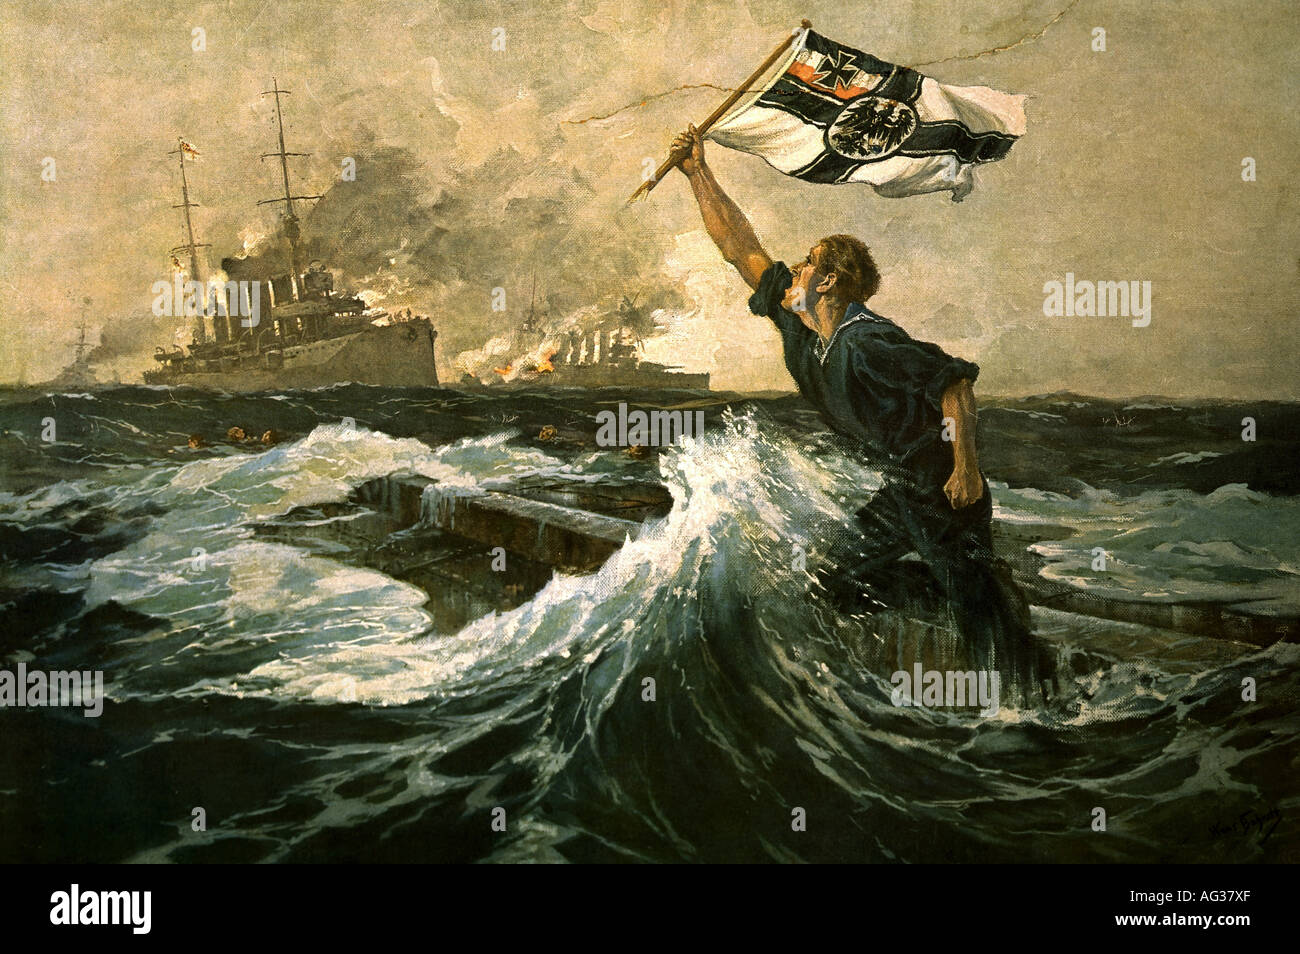 events, First World War, naval warfare, Battle of the Falkland Islands, 8.12.1914, 'The last man', engraving after painiting by Hans Bordt, 1915, sailor, hero, flag, Germany, German navy, 20th century, , Stock Photo